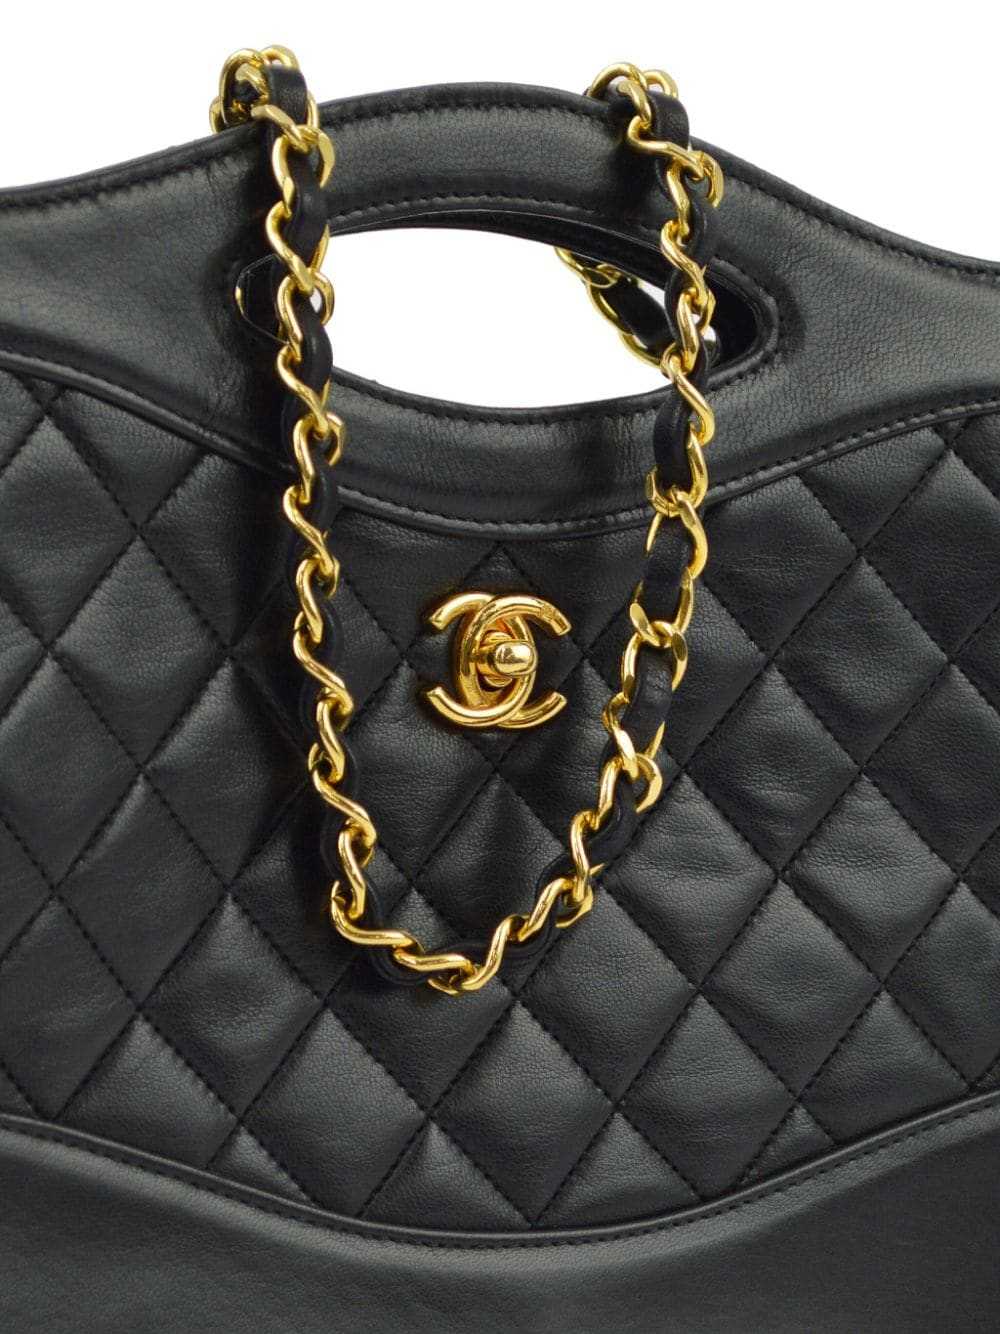 CHANEL Pre-Owned 1990 diamond-quilted two-way sho… - image 3